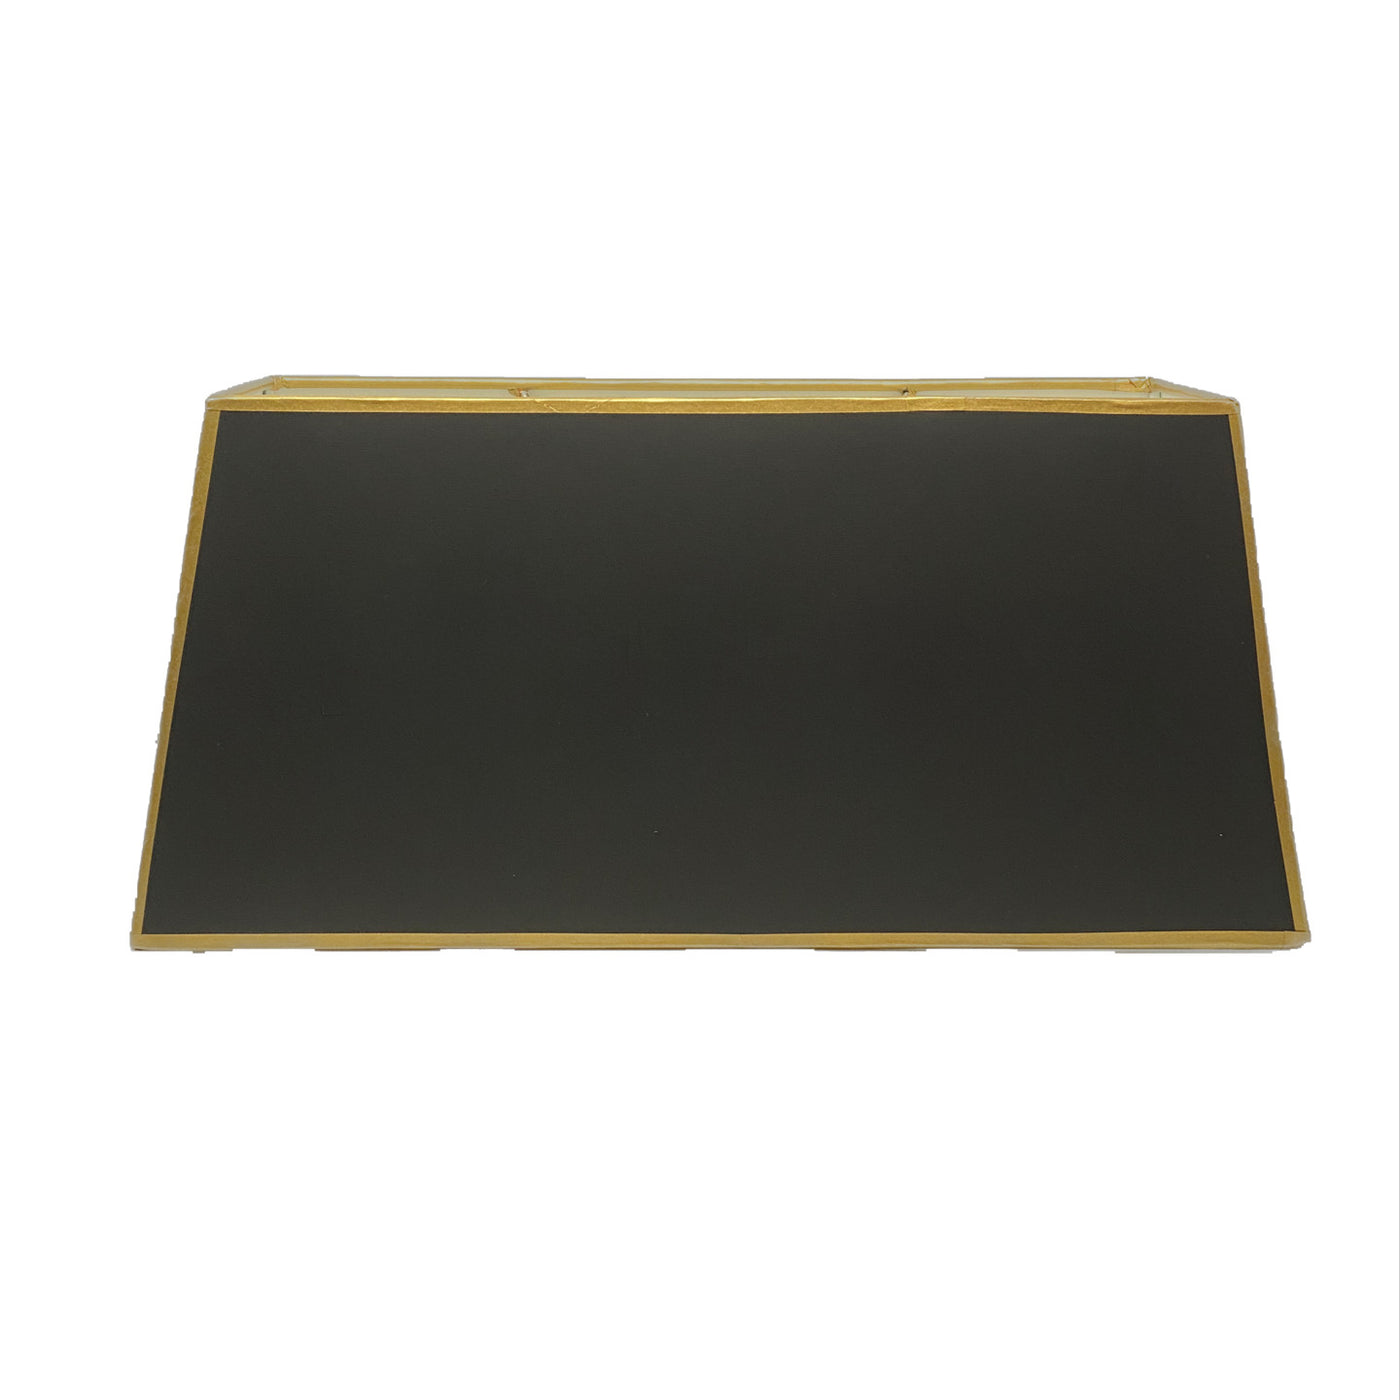 Shallow Rectangle - Black/Gold Lampshade